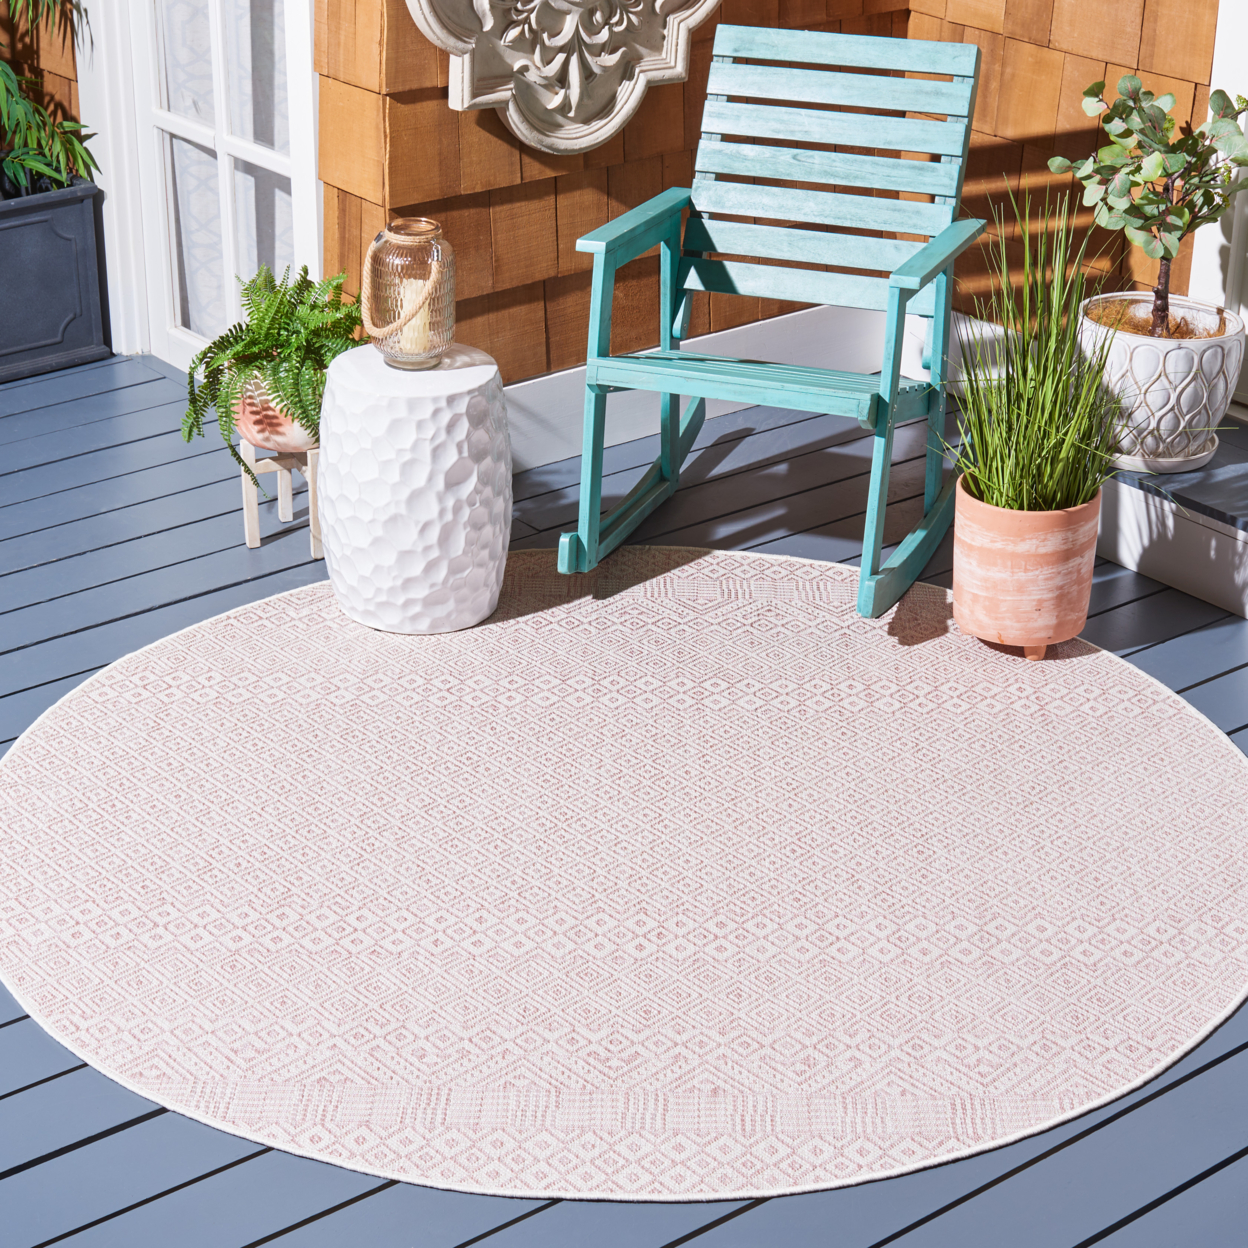 SAFAVIEH Outdoor CY8235-56212 Courtyard Ivory / Soft Pink Rug - 2' 7 X 5'